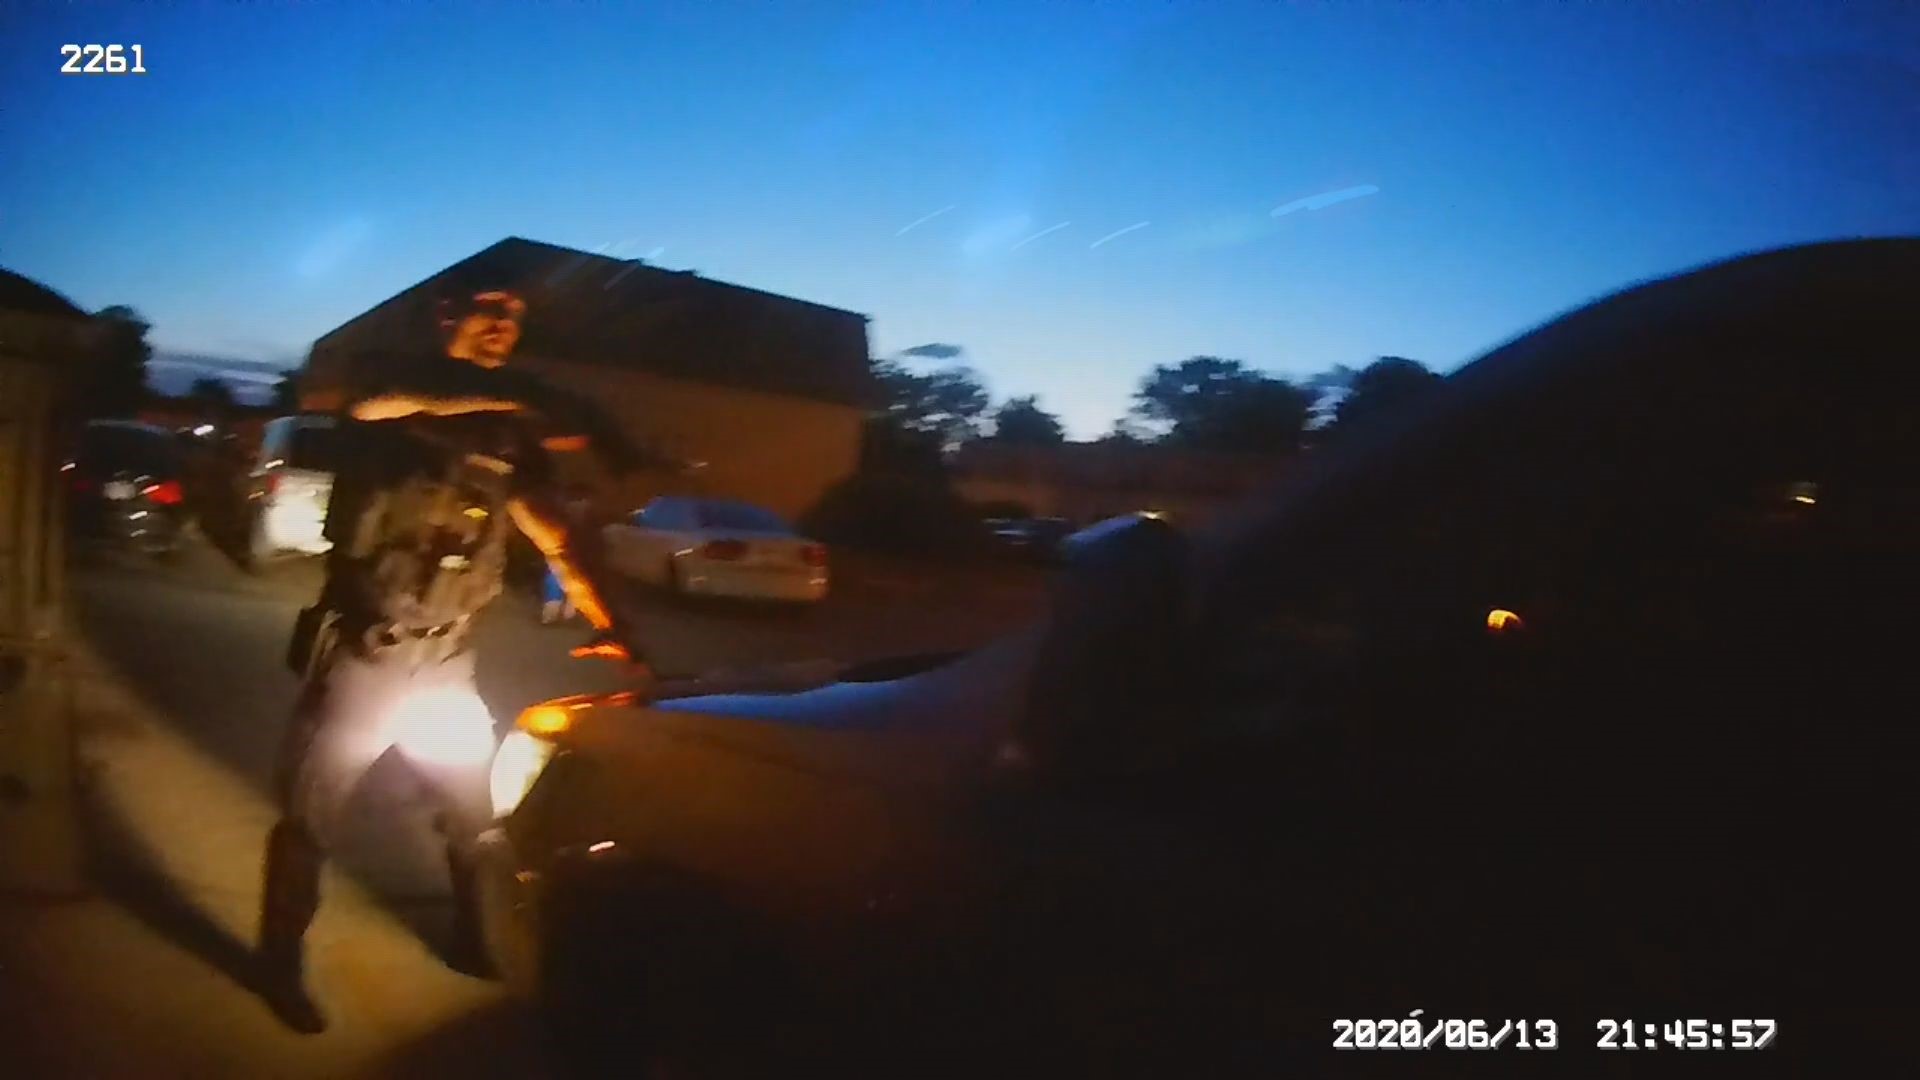 The body cam footage of 2 officers involved in the shooting of Victor Dale, Jr. has been released. The full videos are available on our YouTube and at wtol.com.